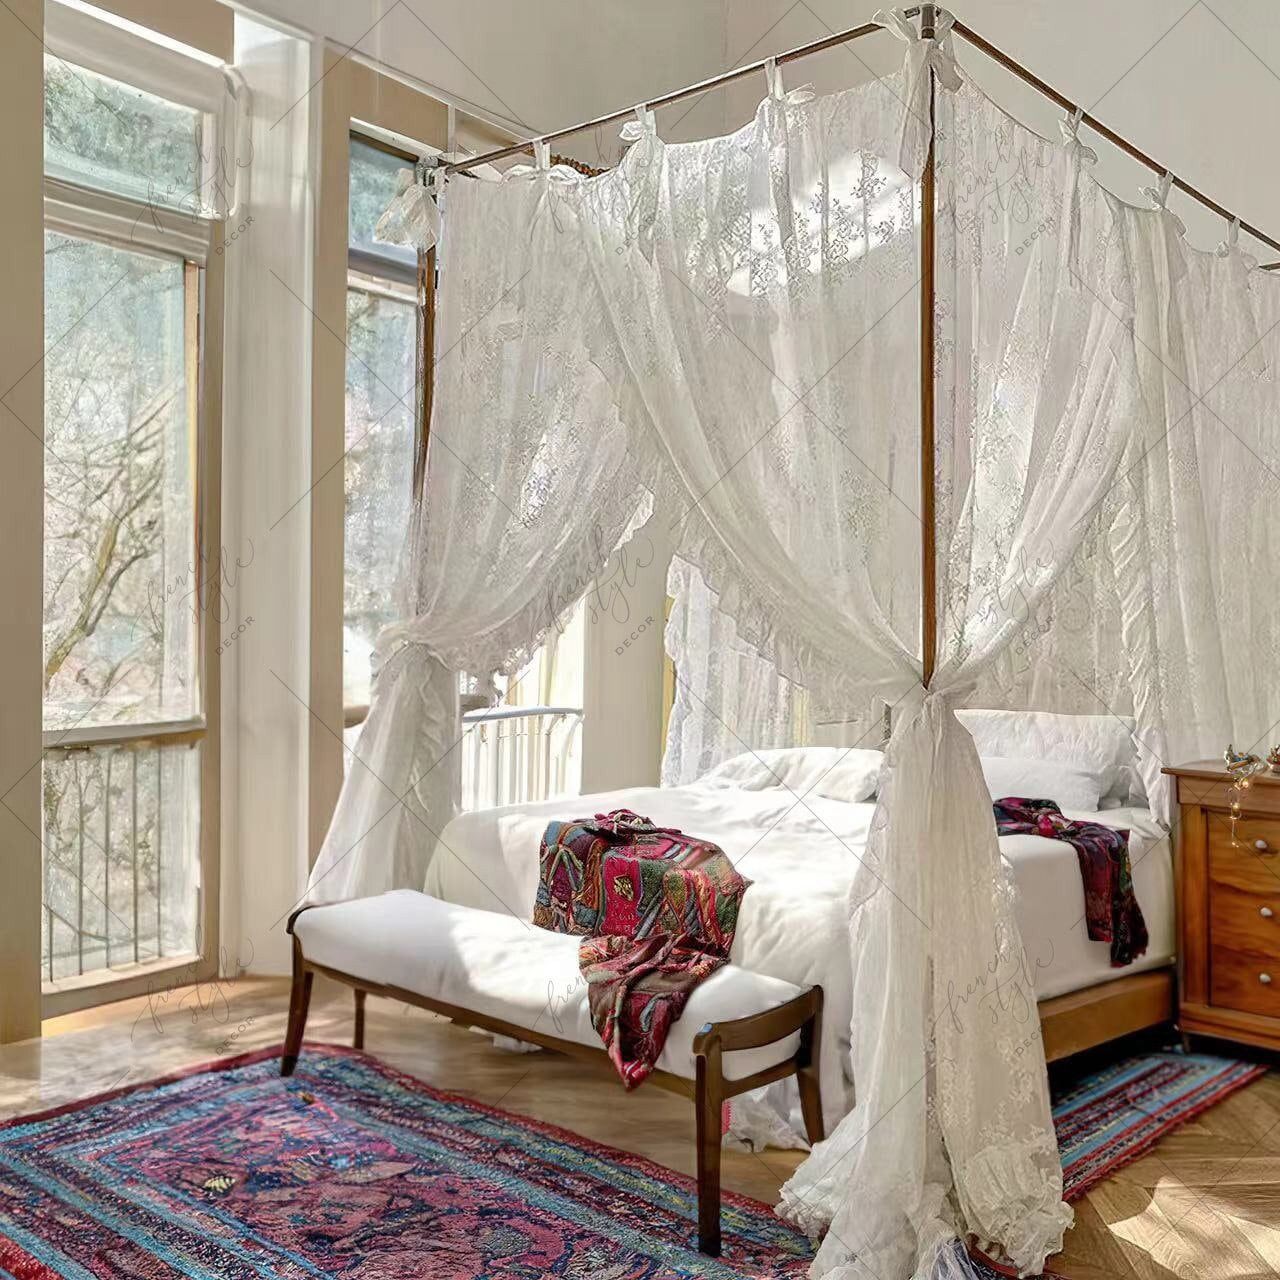 Experience Luxury and Elegance: Queen Size Canopy Bed with Curtains